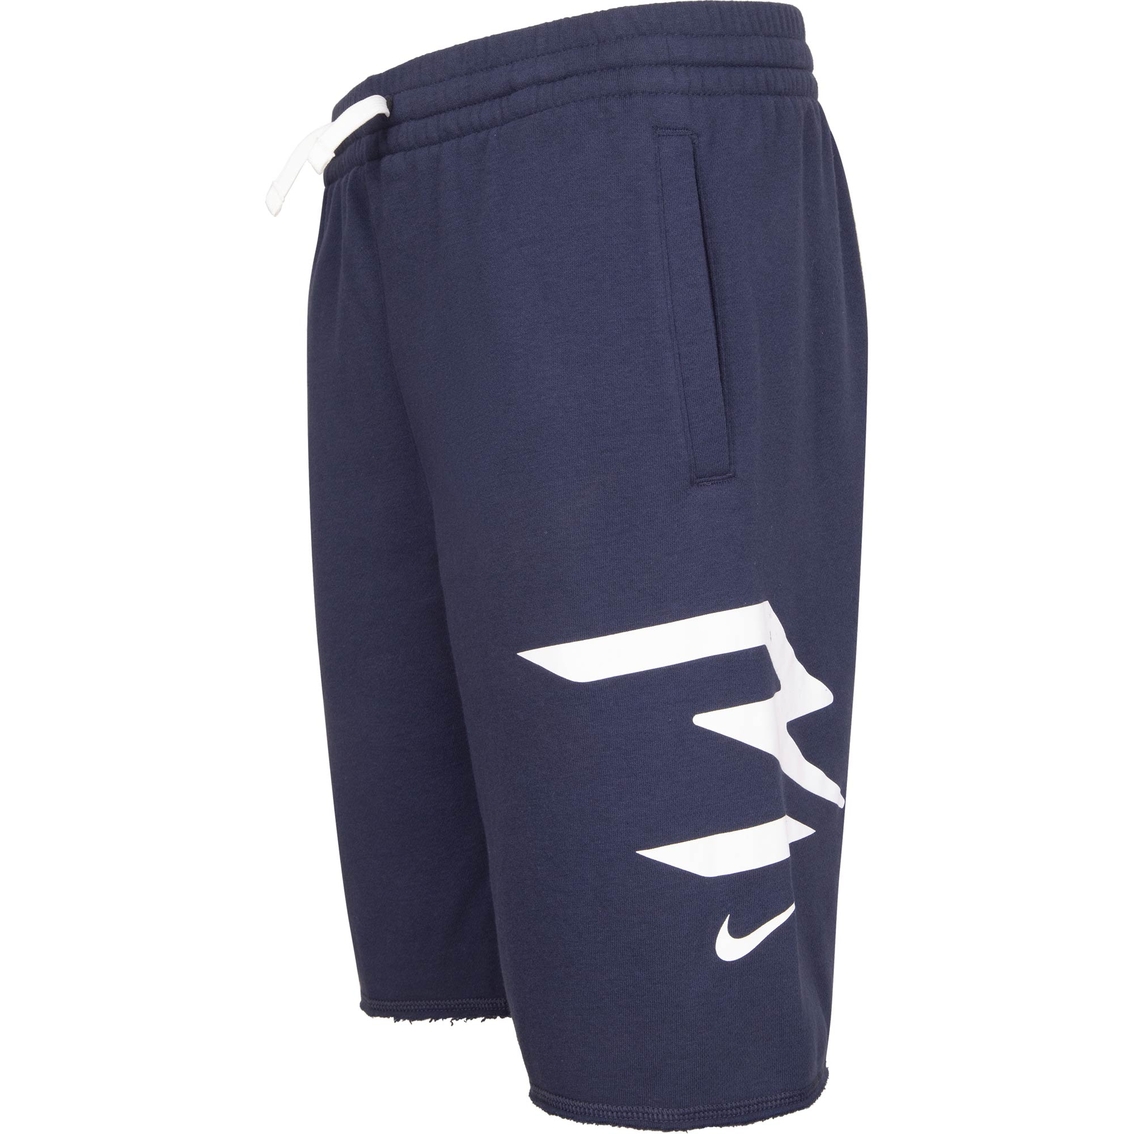 Nike 3Brand By Russell Wilson All Season Shorts - Image 3 of 5